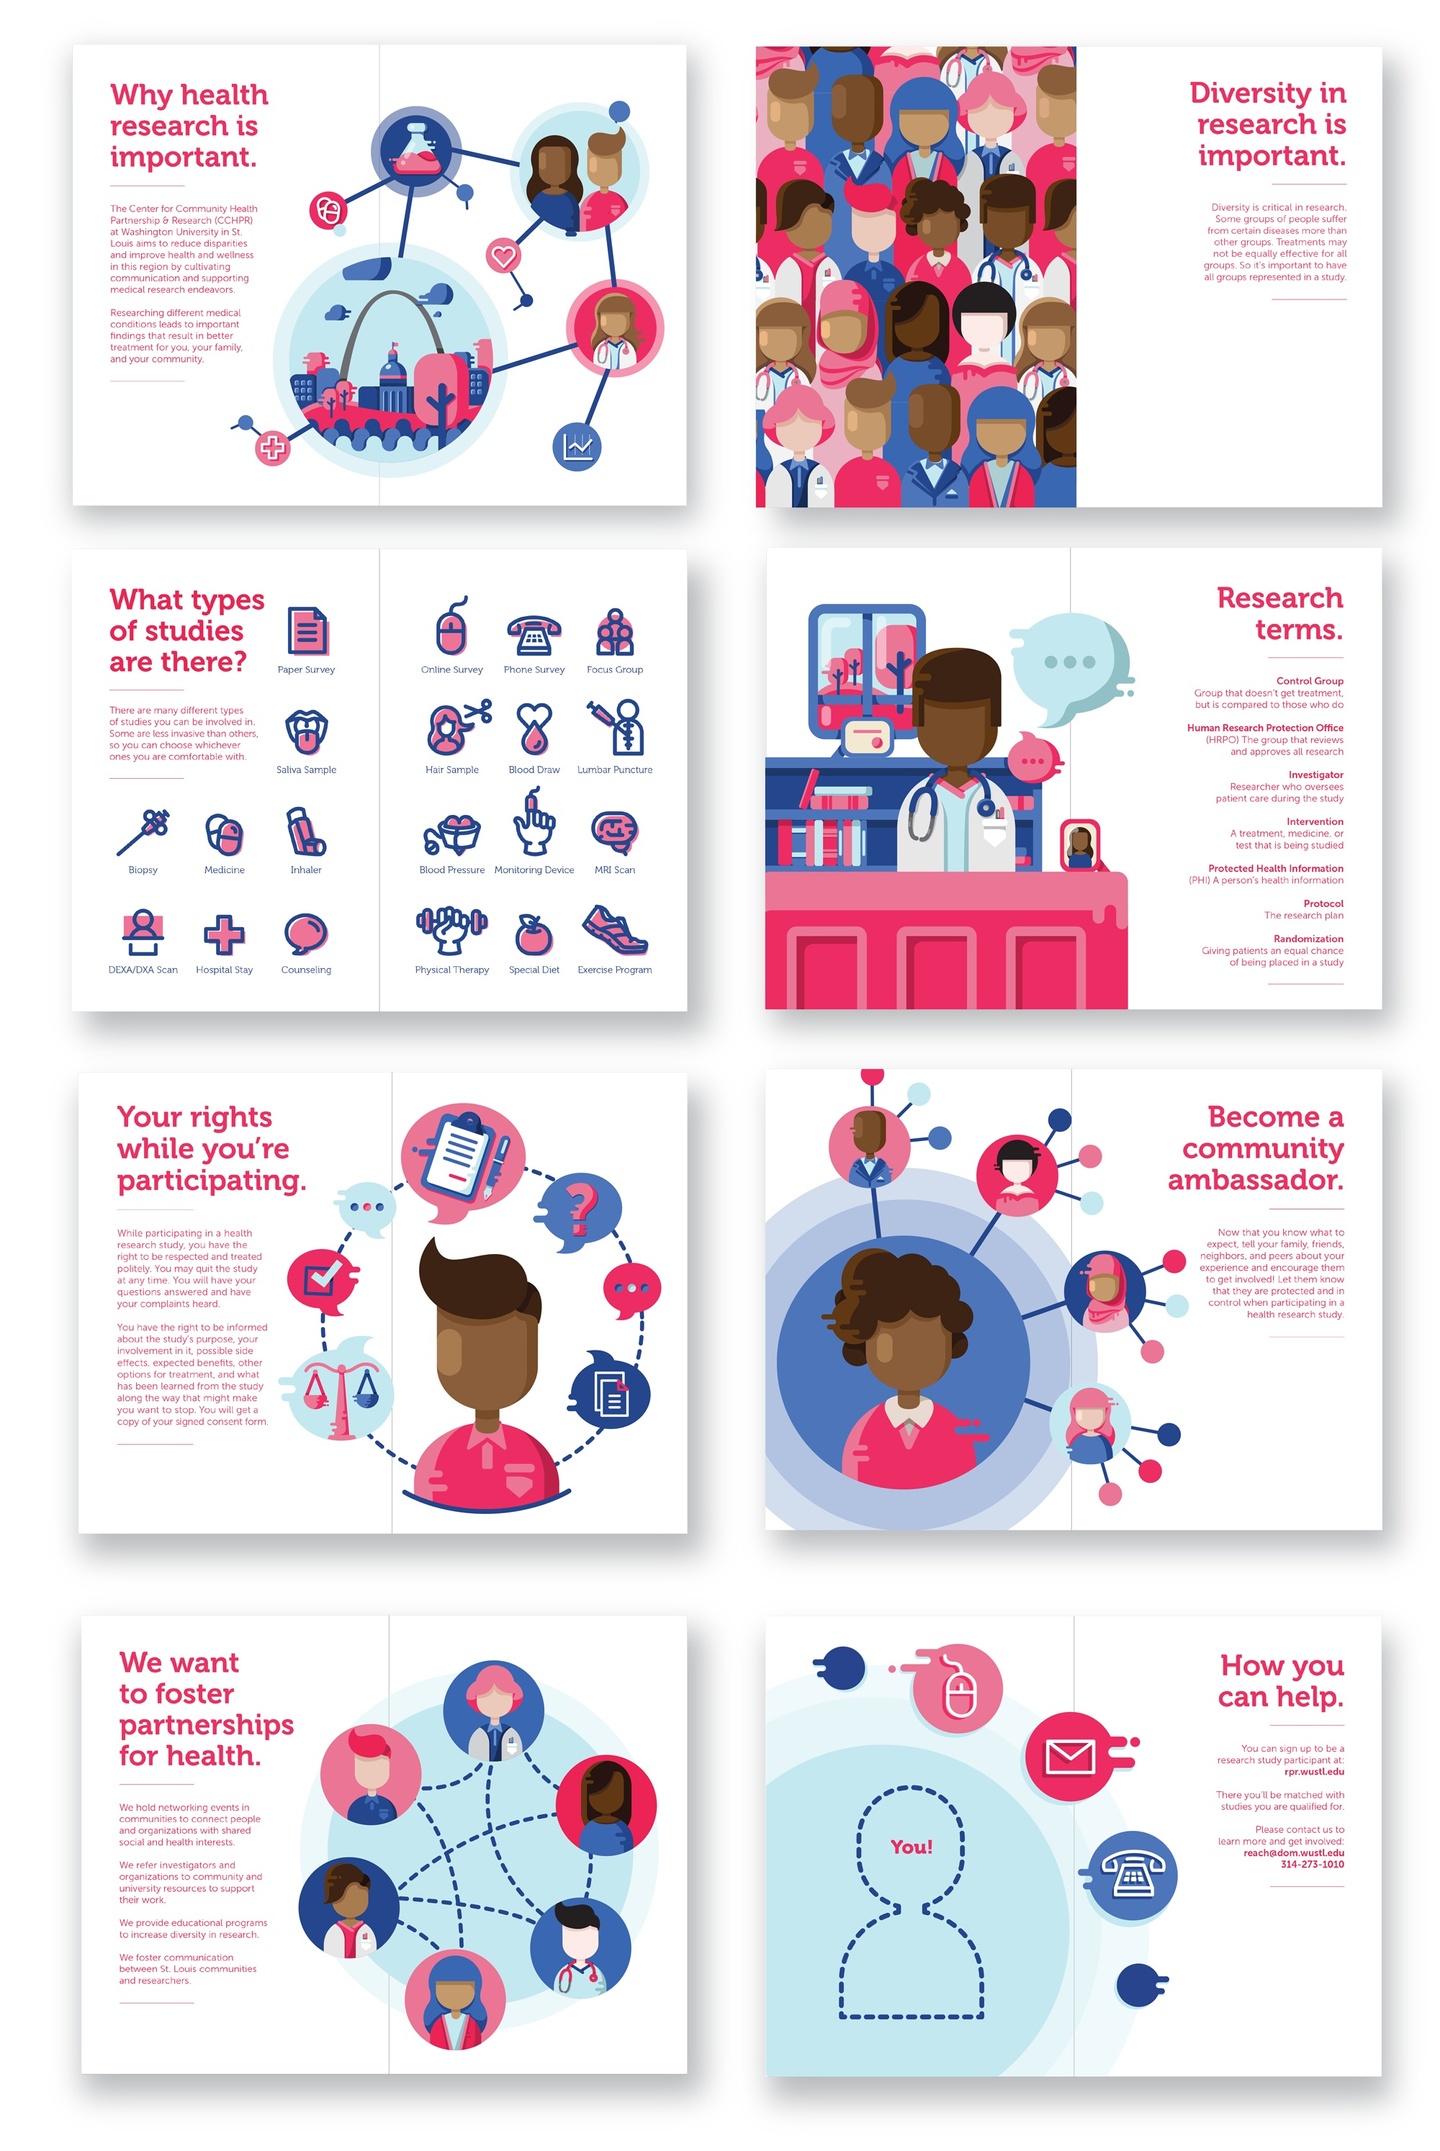 Branding layout of eight cards with a pink and blue color palette for icons and pink text. Card one reads Why health reach is so important; card two reads Diversity in research is important; card three reads What types of studies are there?; card four reads Research terms.; card 5 reads Your rights while you're participating.; card 6 reads Become a community ambassador.; card 7 reads We want to foster partnerships for health; card 8 reads How you can help.